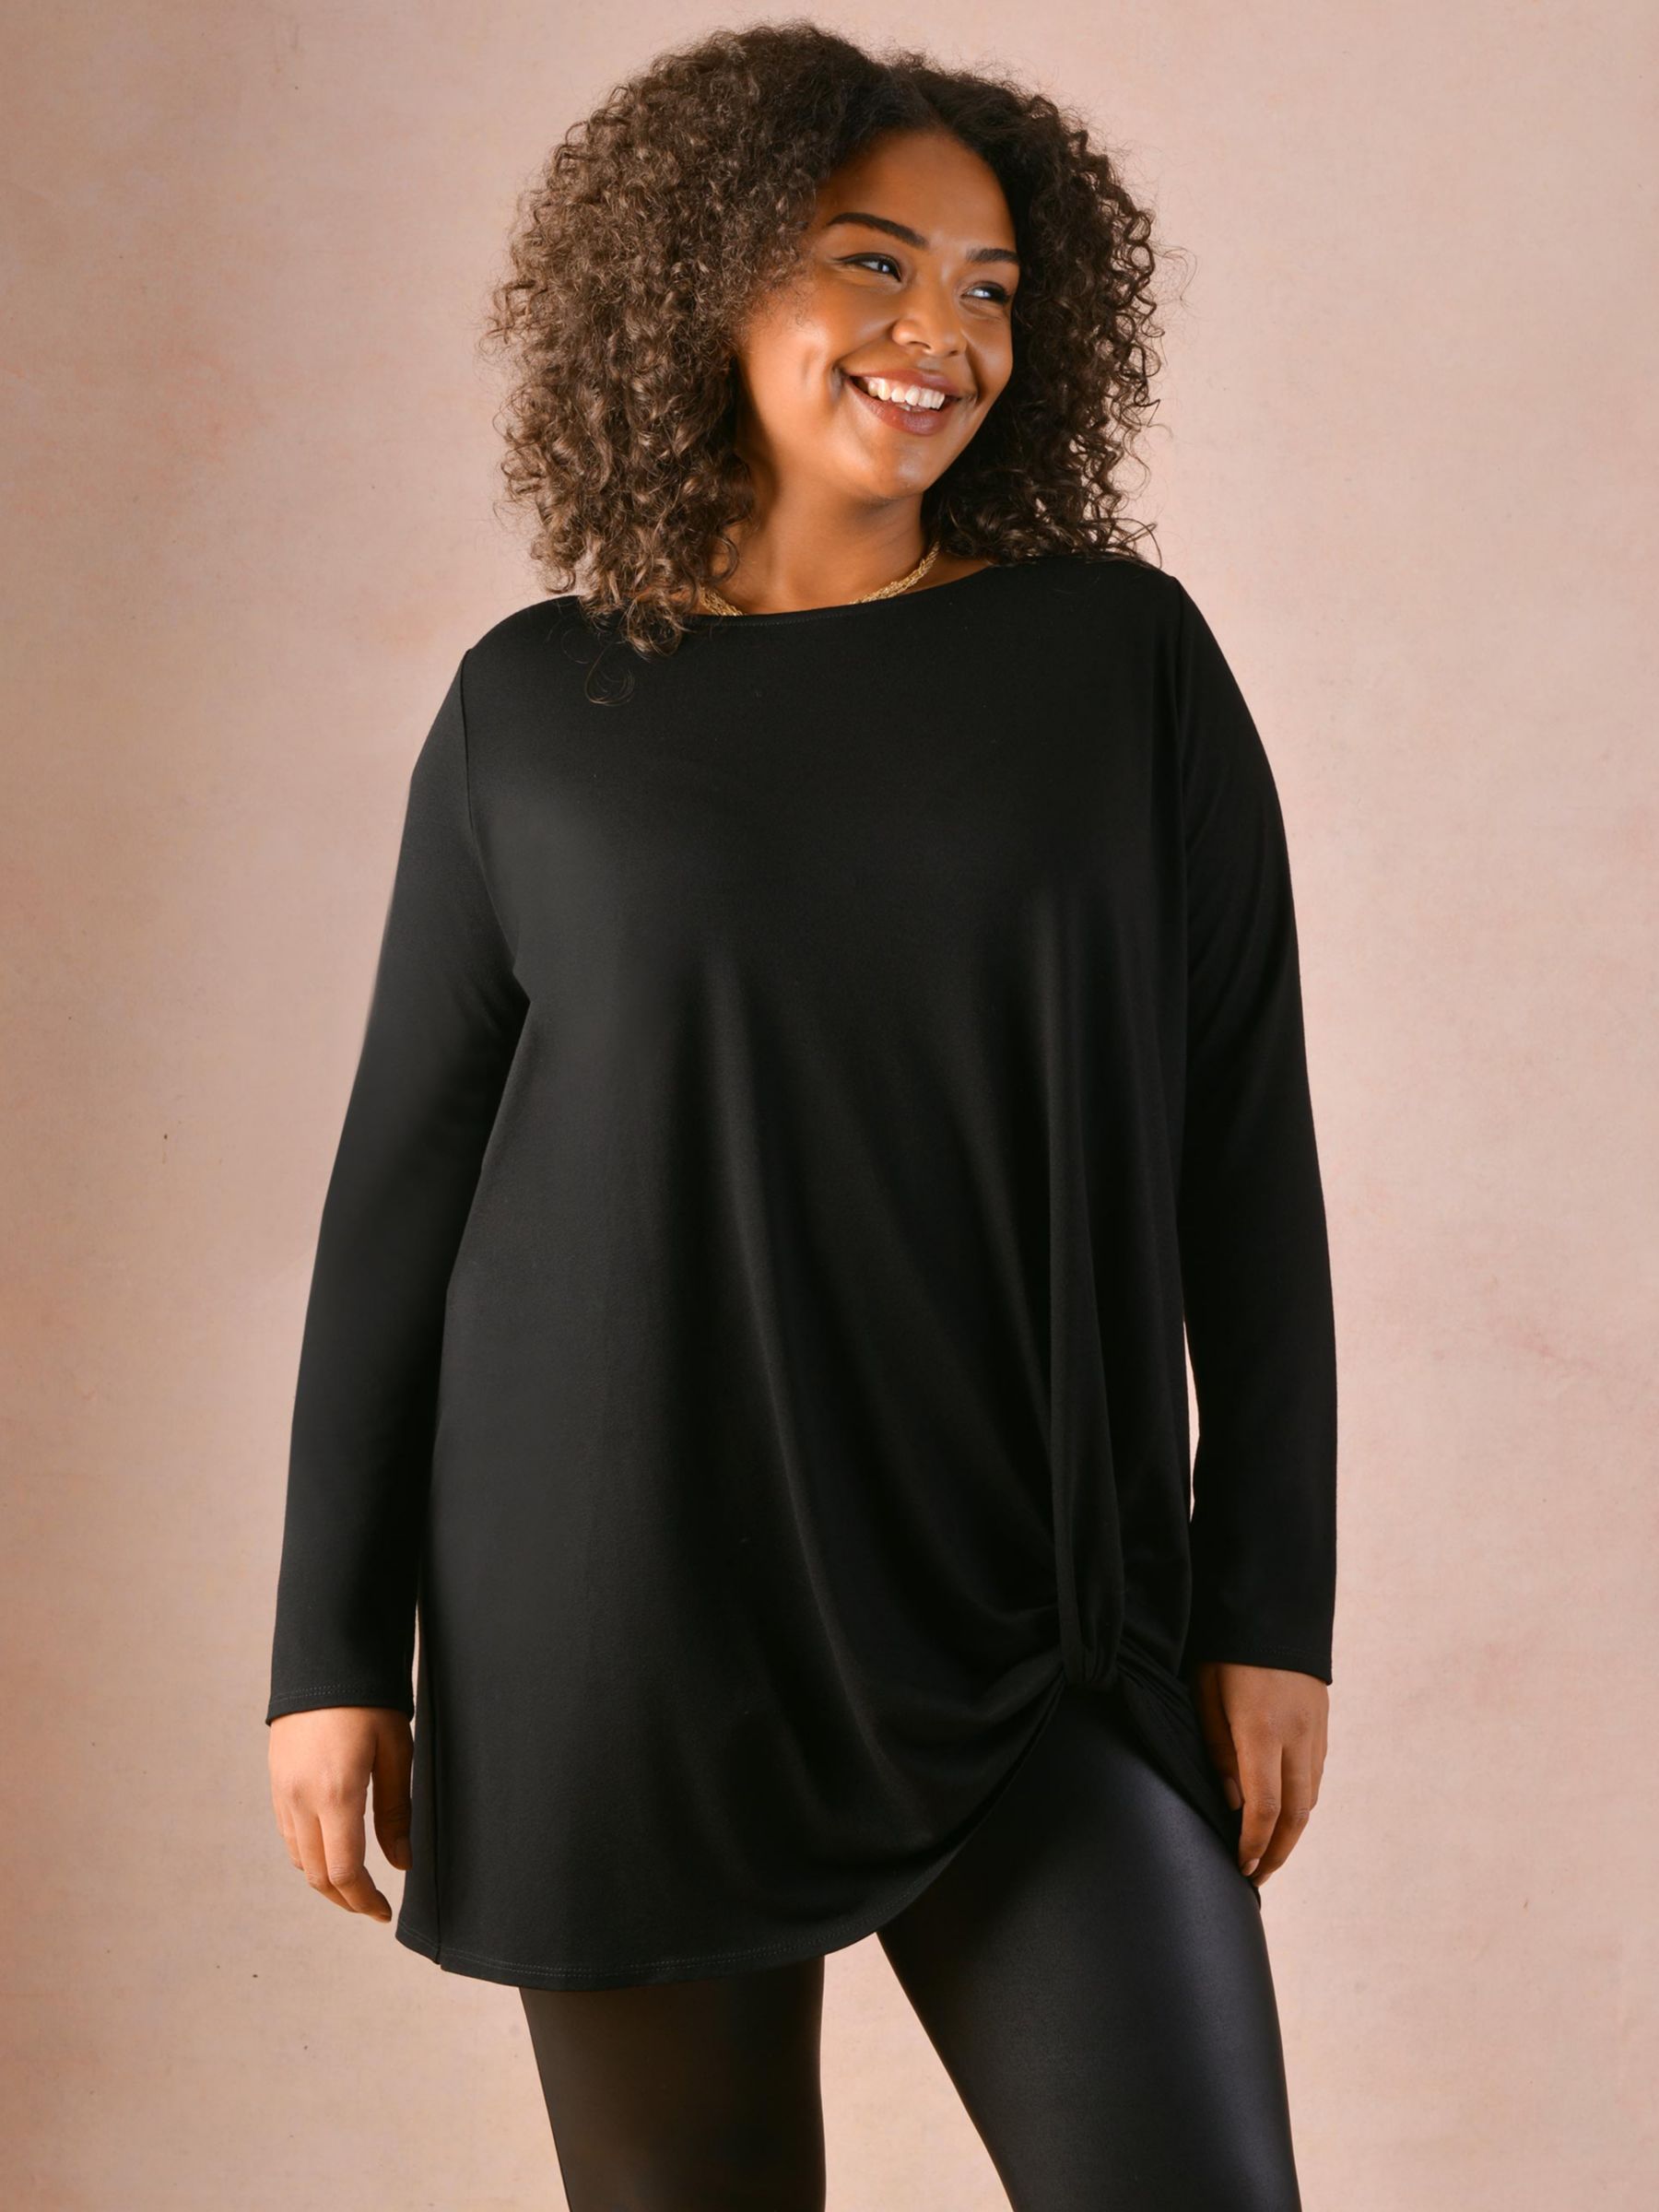 Plus Size Outfits Over 50 5 best